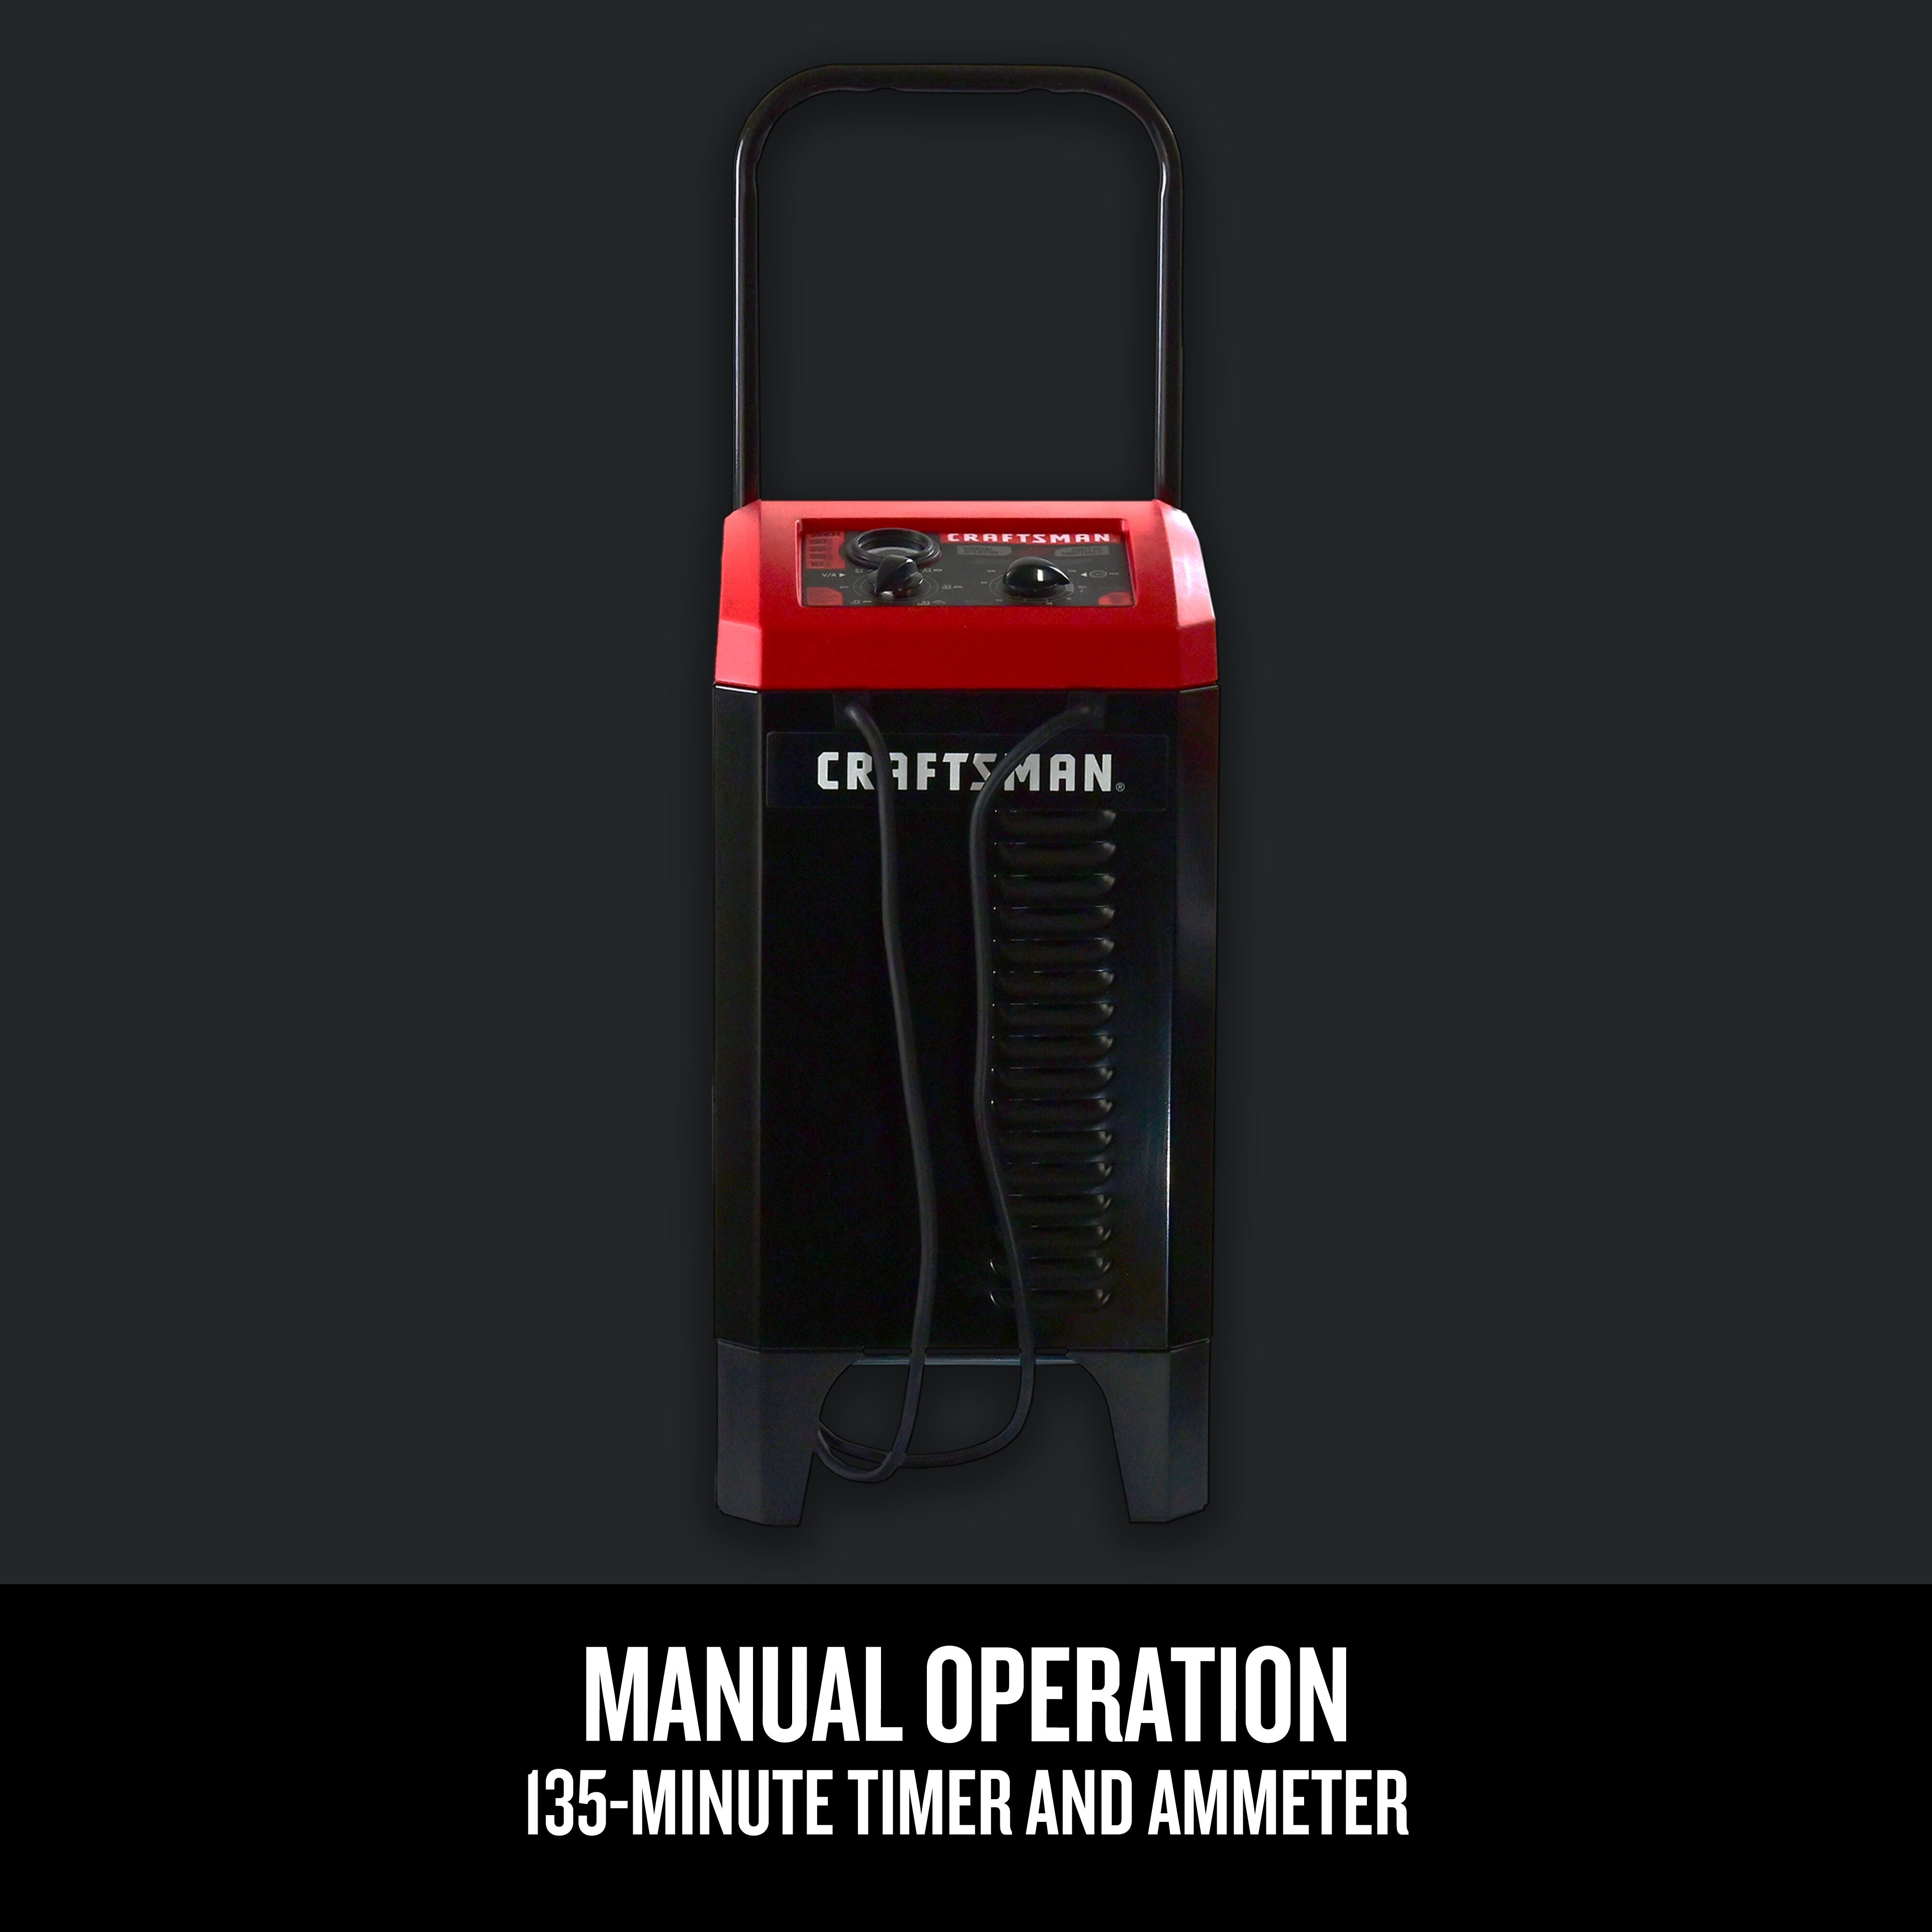 250A 6V/12V Wheeled Battery Charger and Jump Starter manual operation graphic